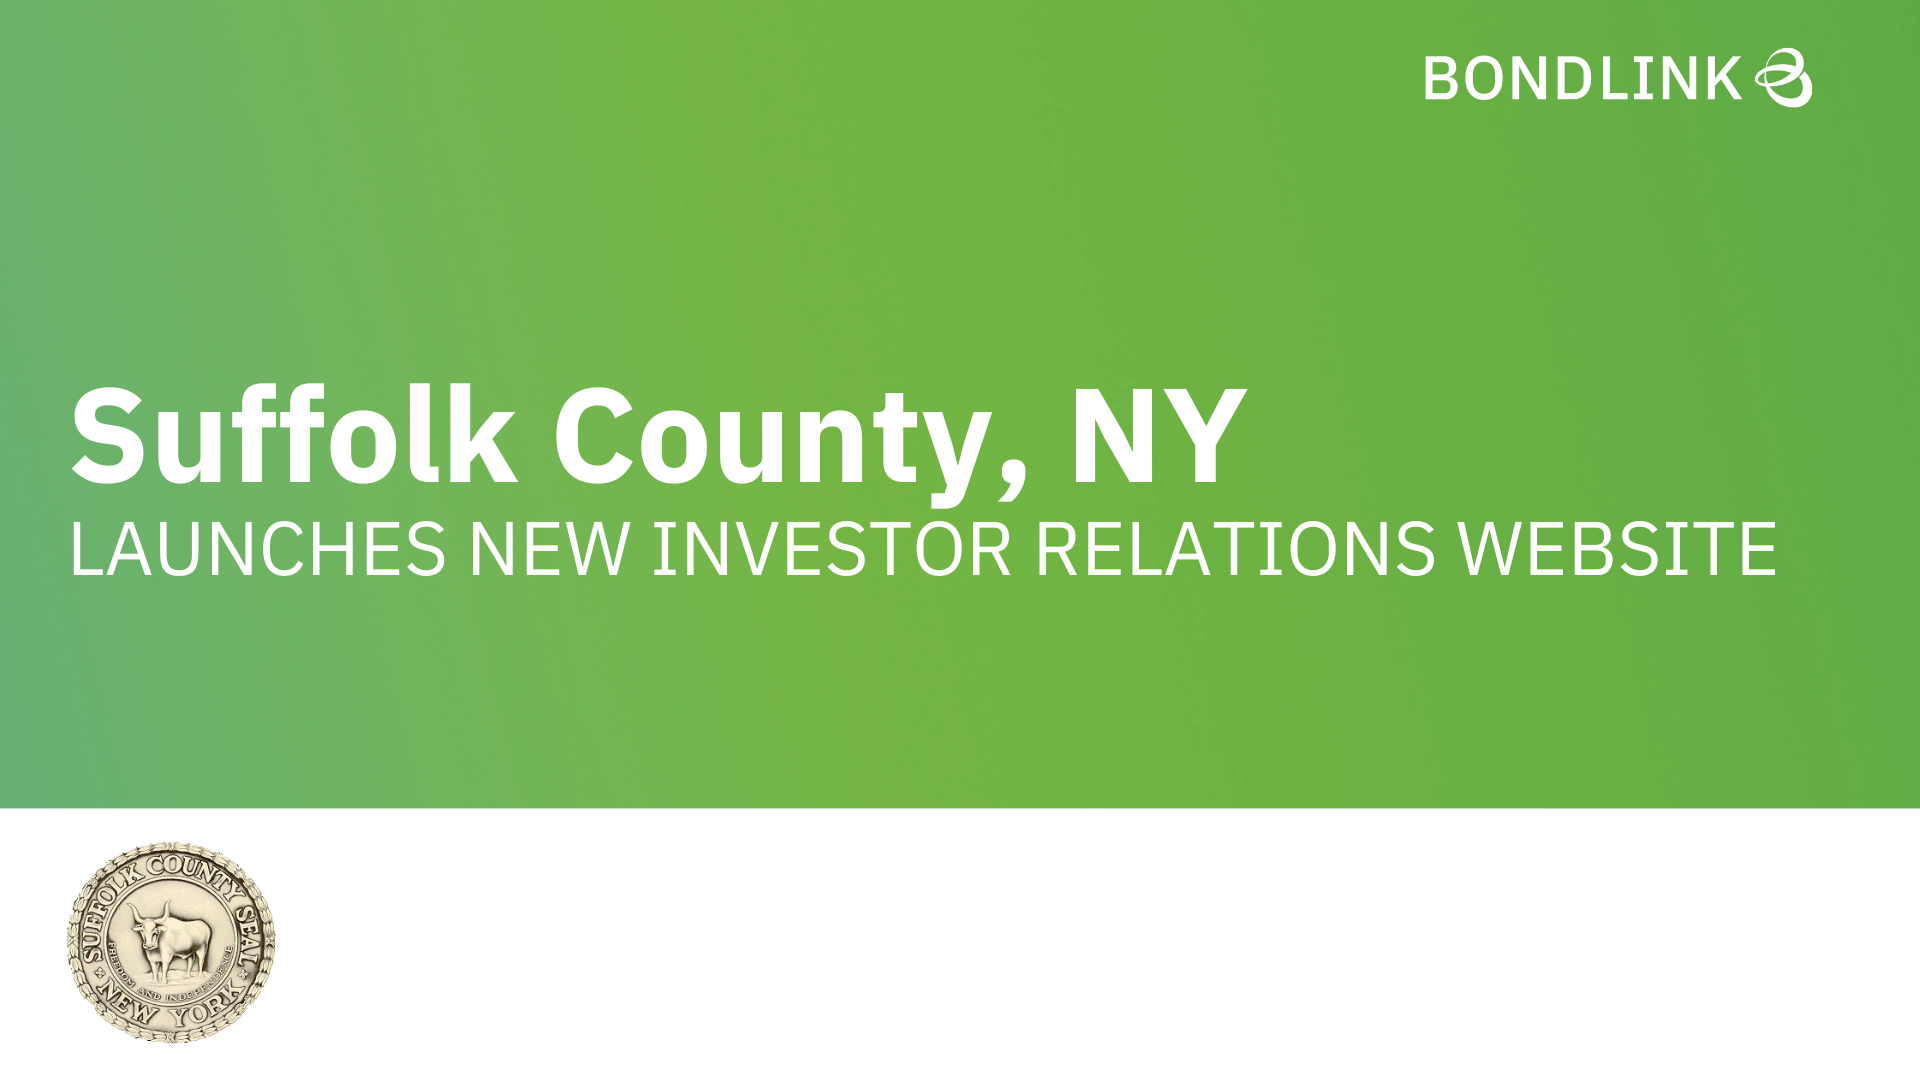 Suffolk County, NY Comptroller Demonstrates Commitment to Transparency with New Investor Relations Program